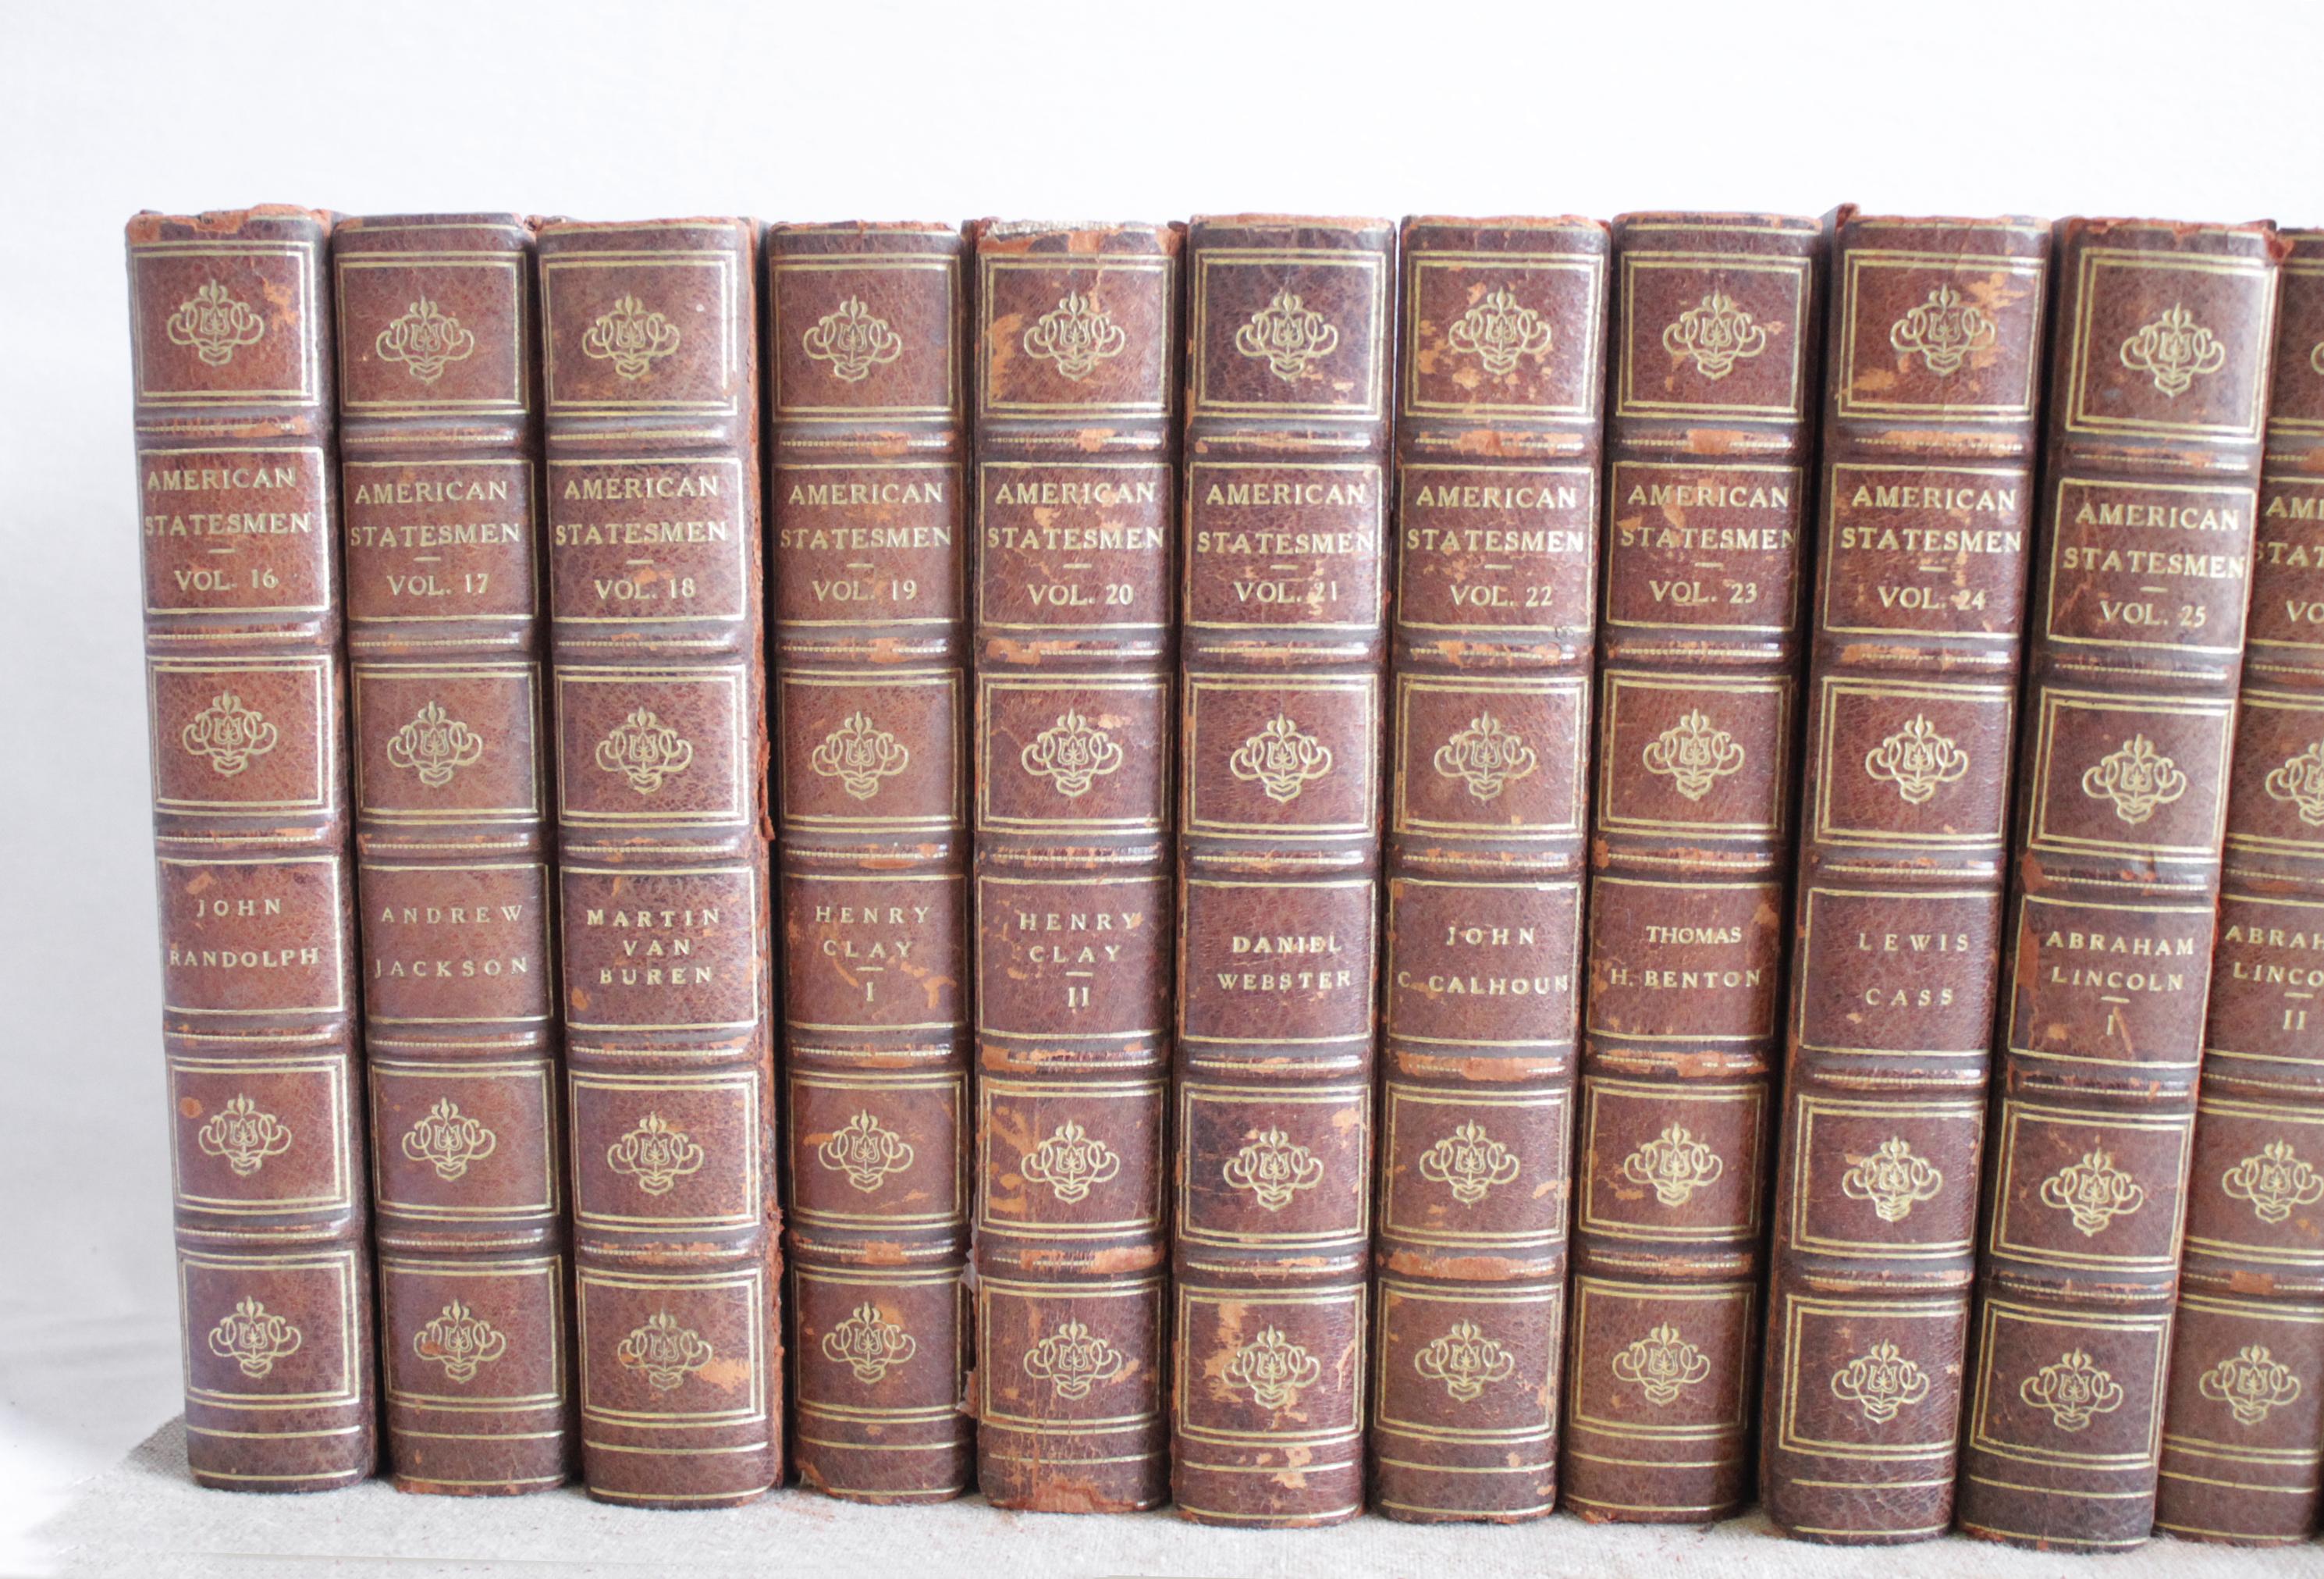 Set of 17 antique leather bound American statesmen books
Volumes 16-32
Approximate dimensions: 1.25